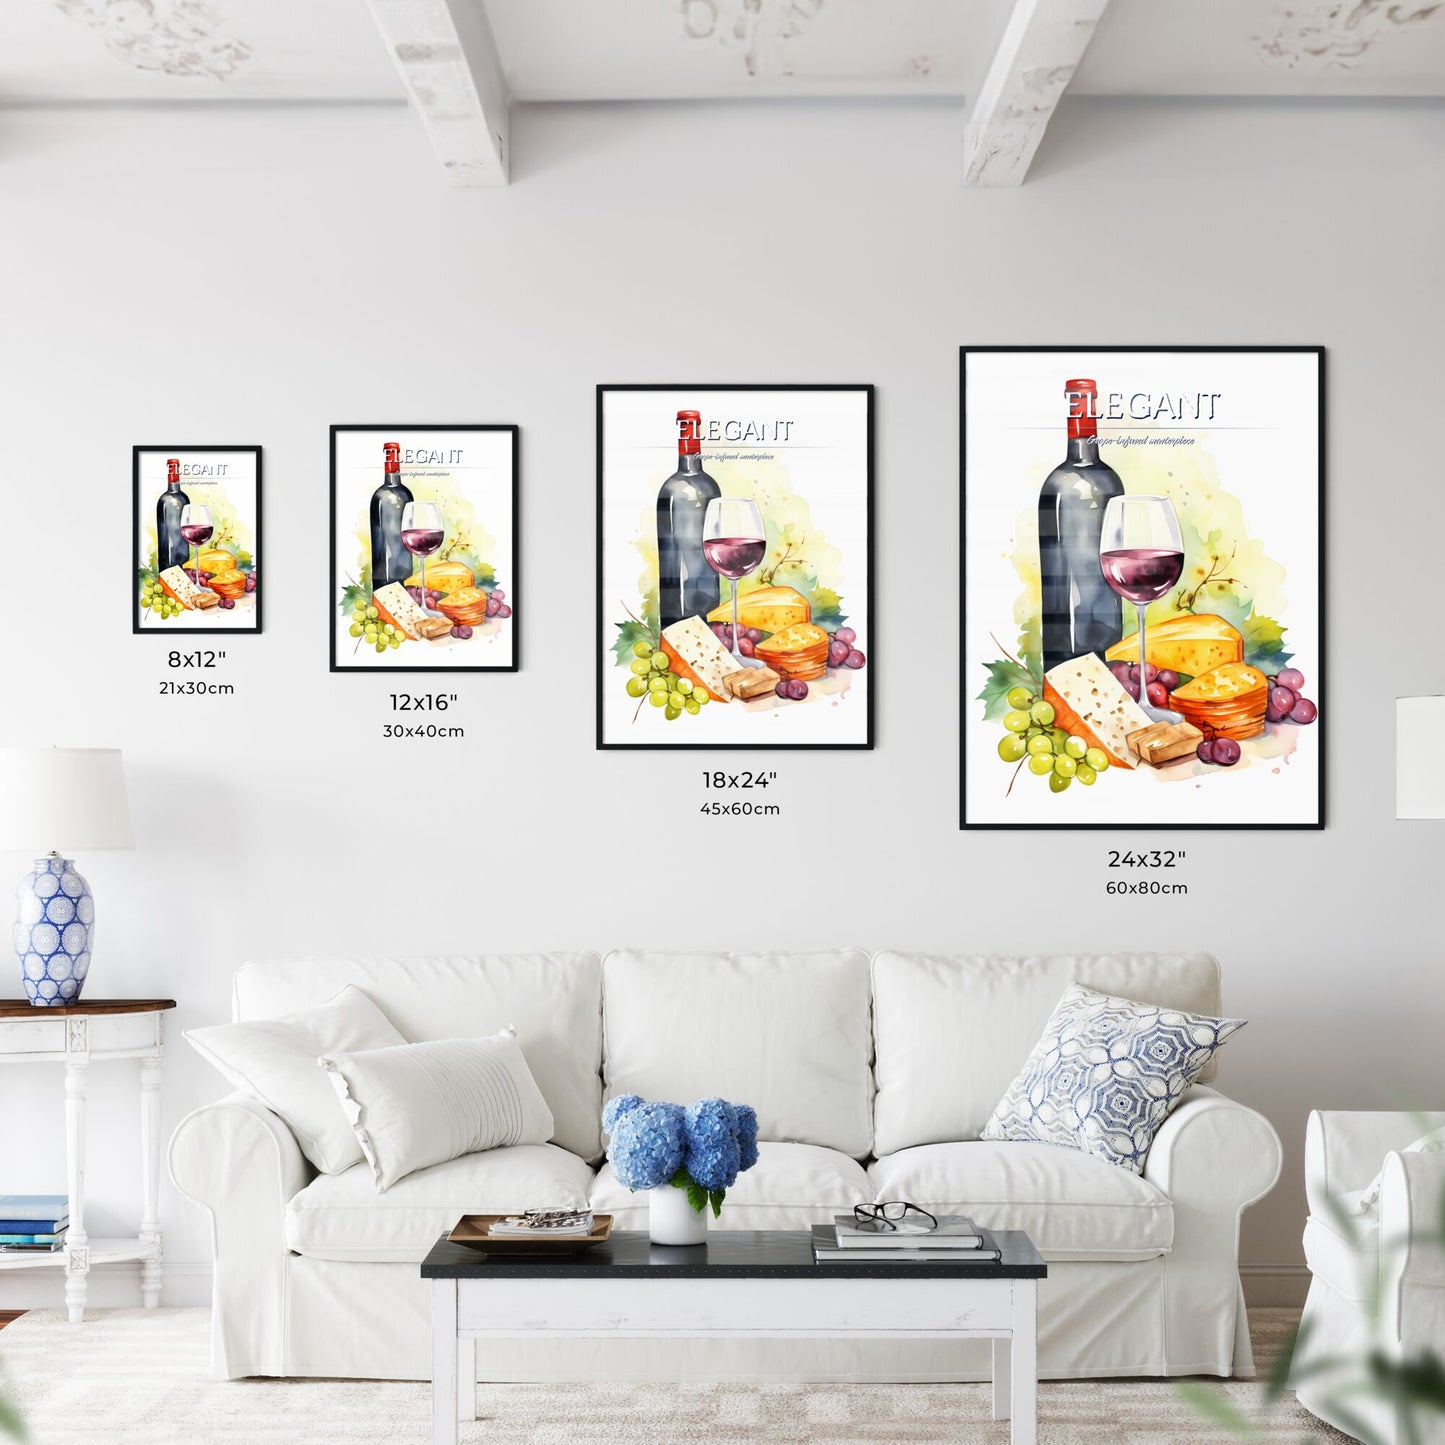 Bottle Of Wine And A Glass Of Wine Art Print Default Title